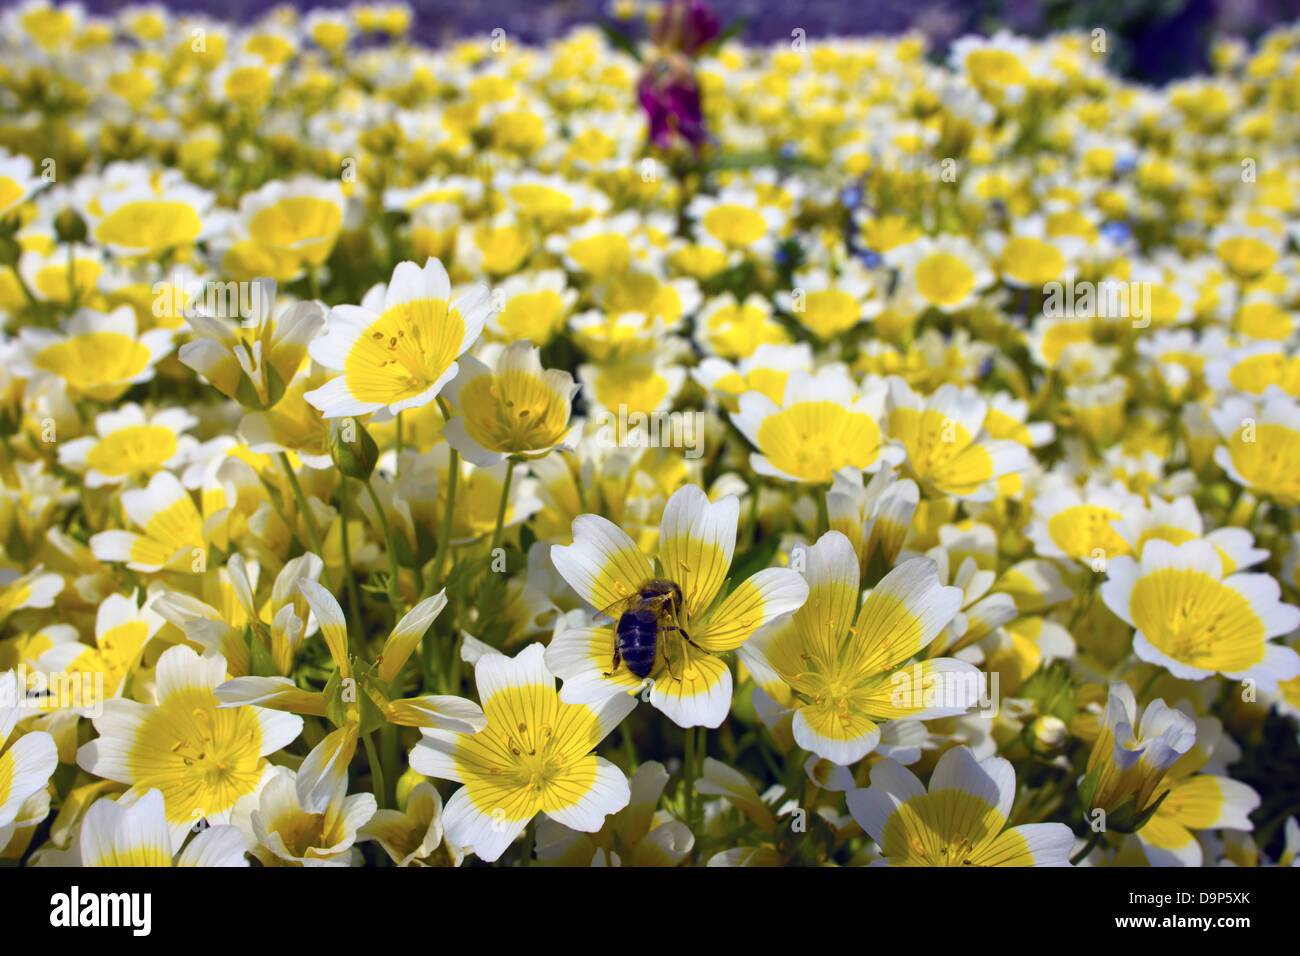 Yellow and white flowers Limnanthes Douglasii is commonly known as poached egg plant or fried egg plant. Stock Photo